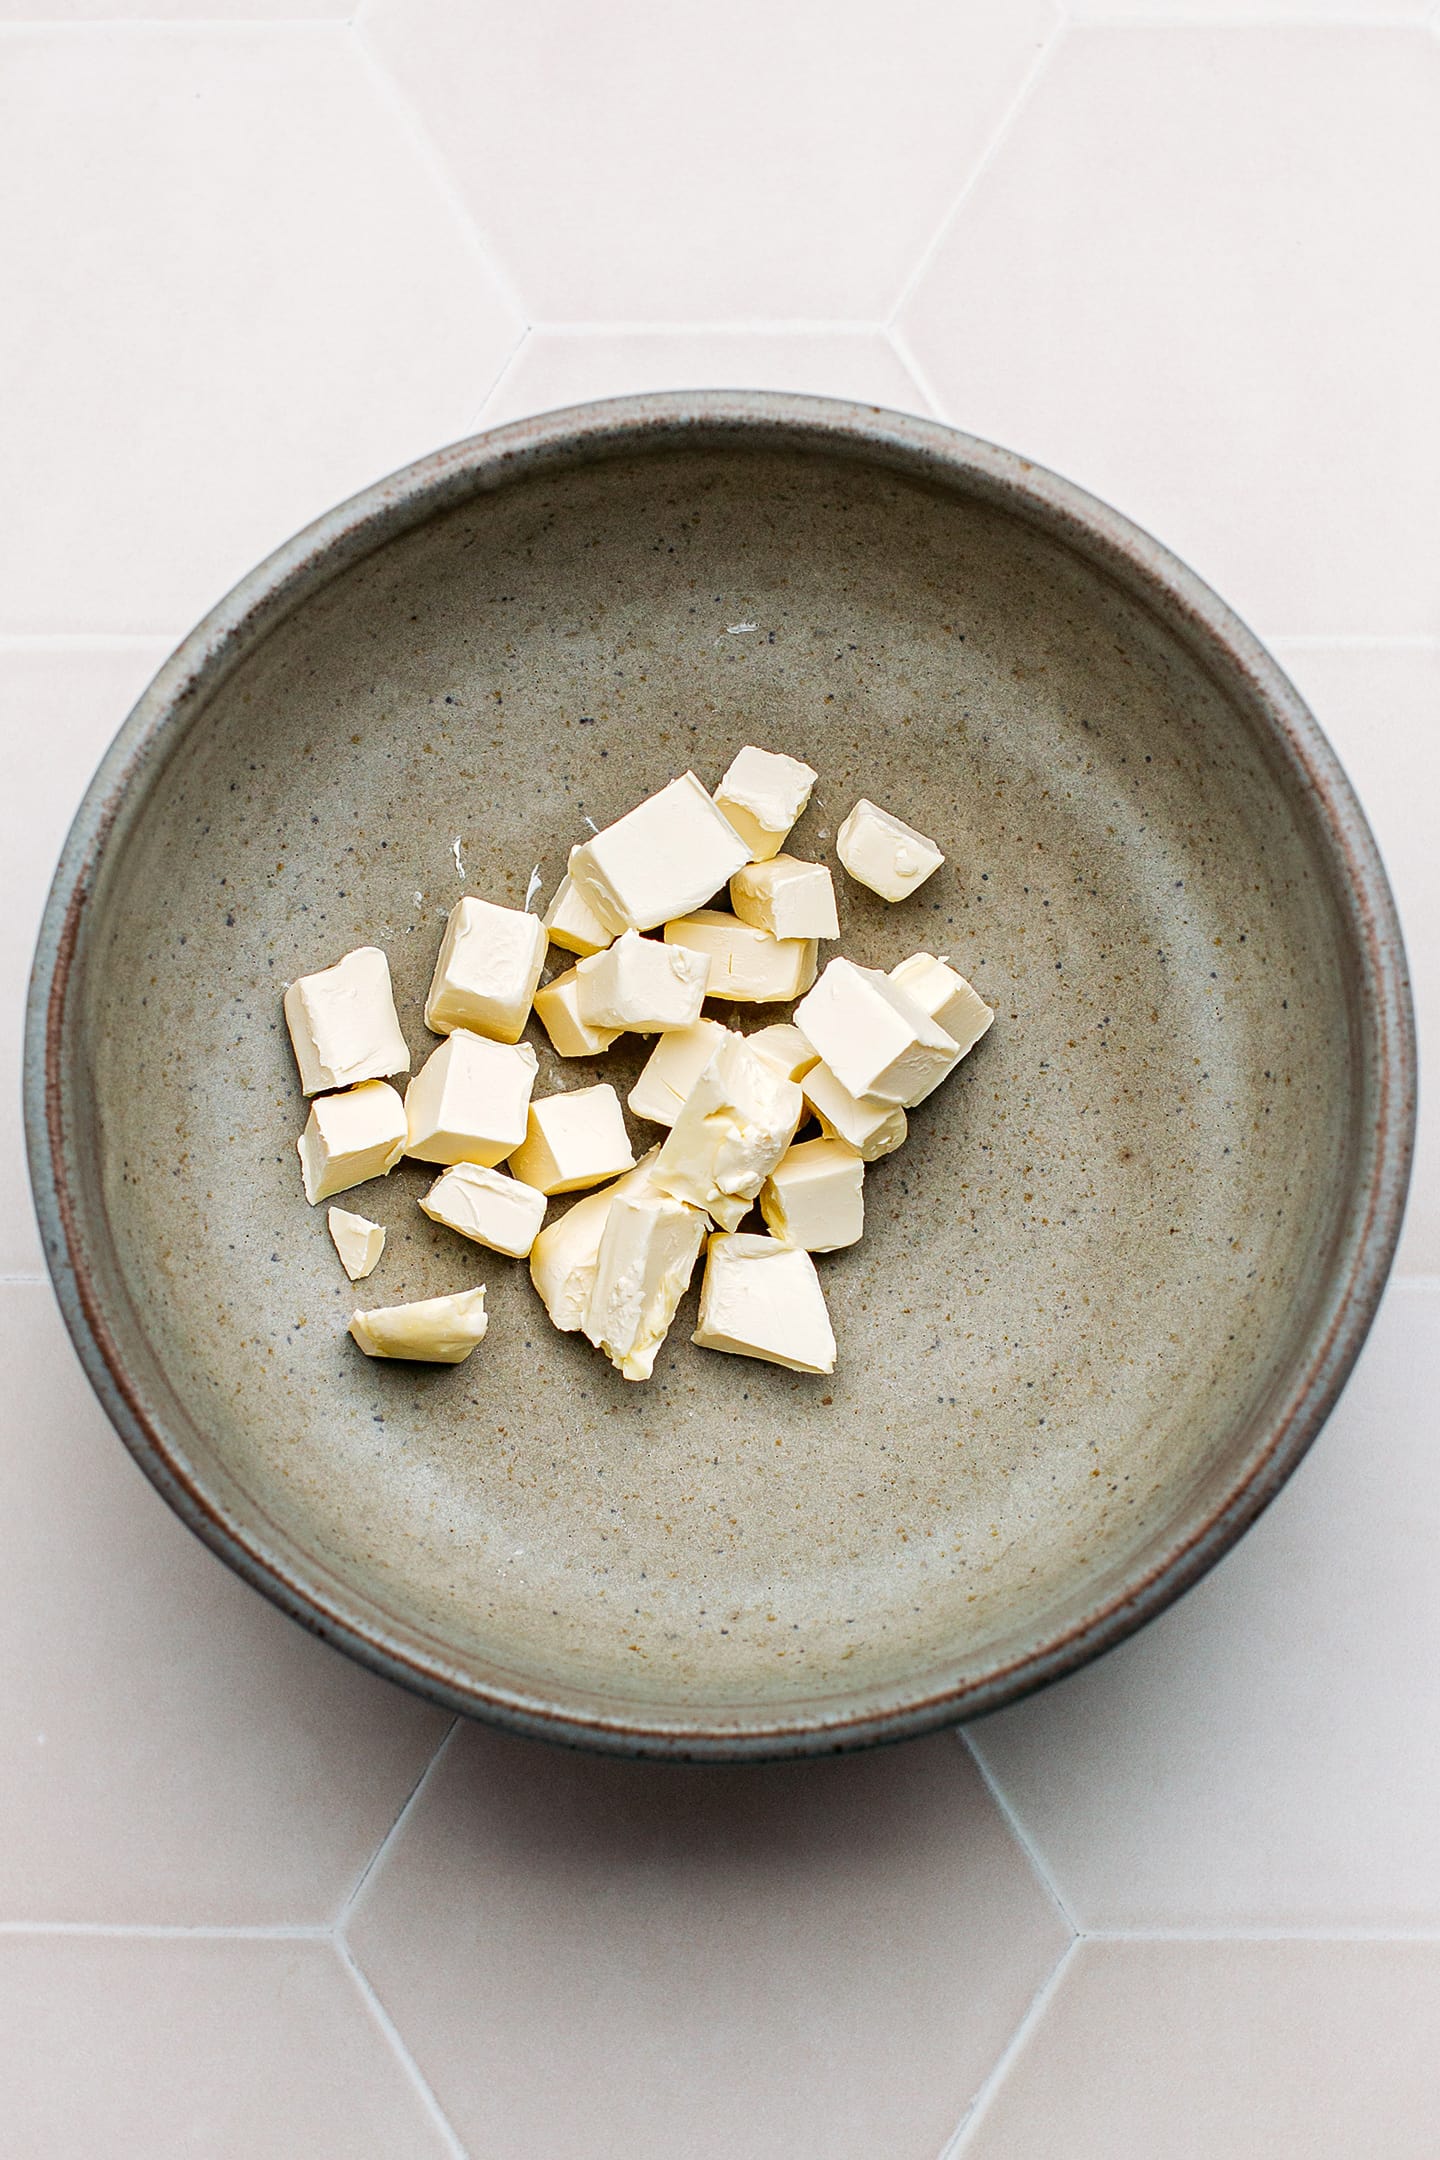 Diced butter in a mixing bowl.